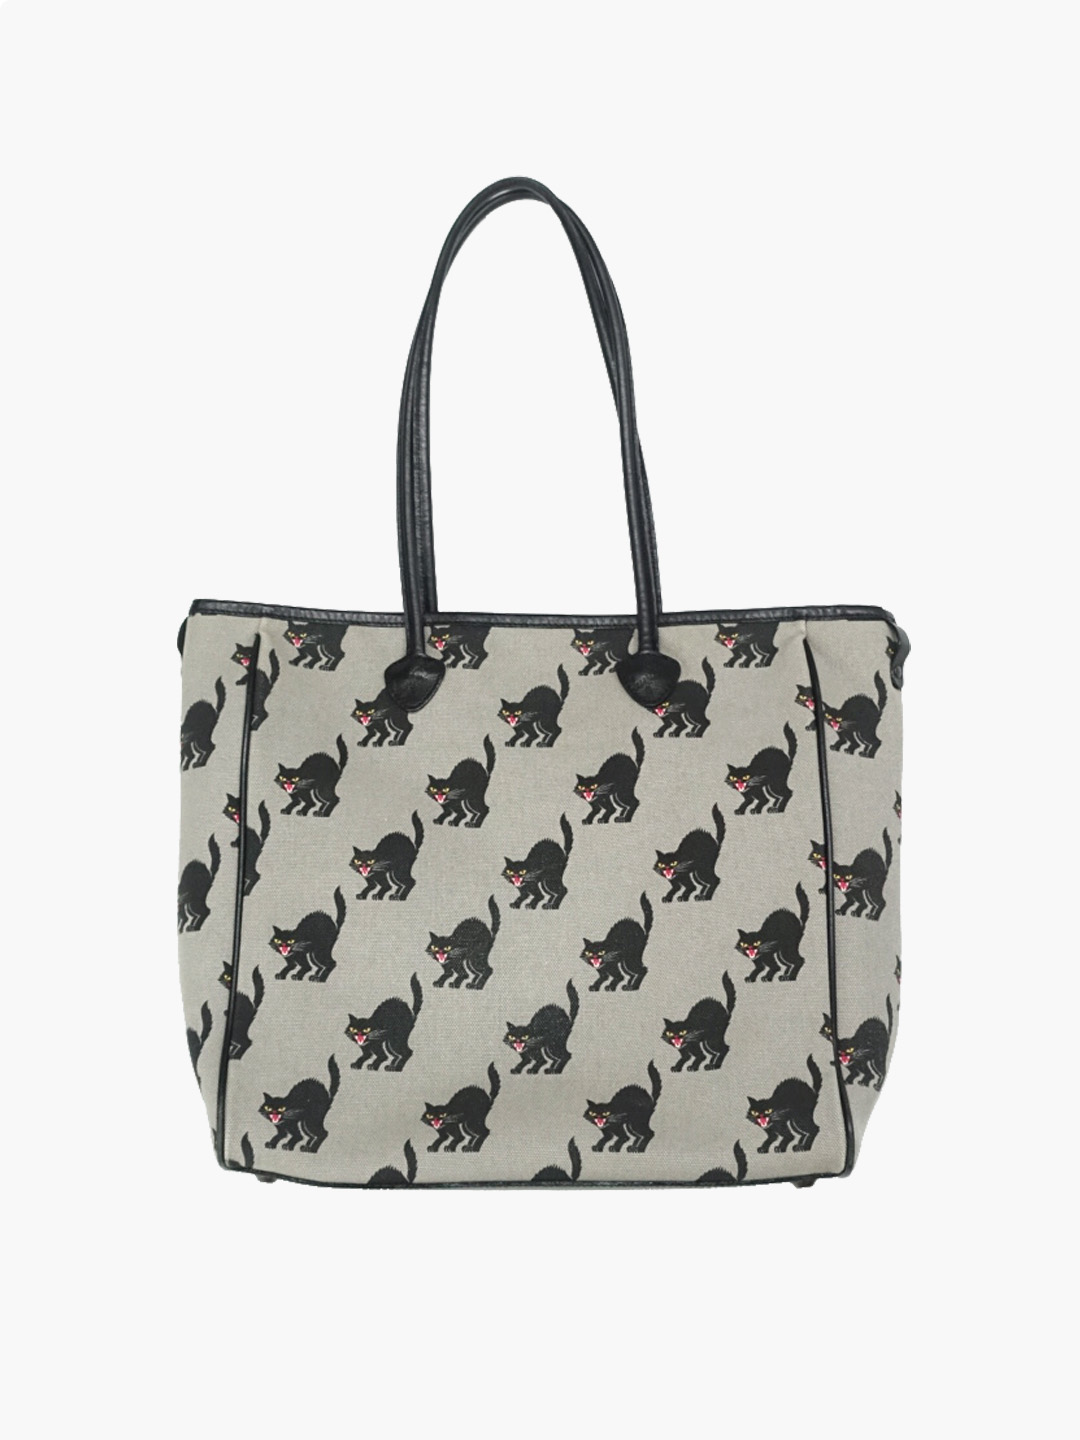 HYSTERIC GLAMOURCat tote bag